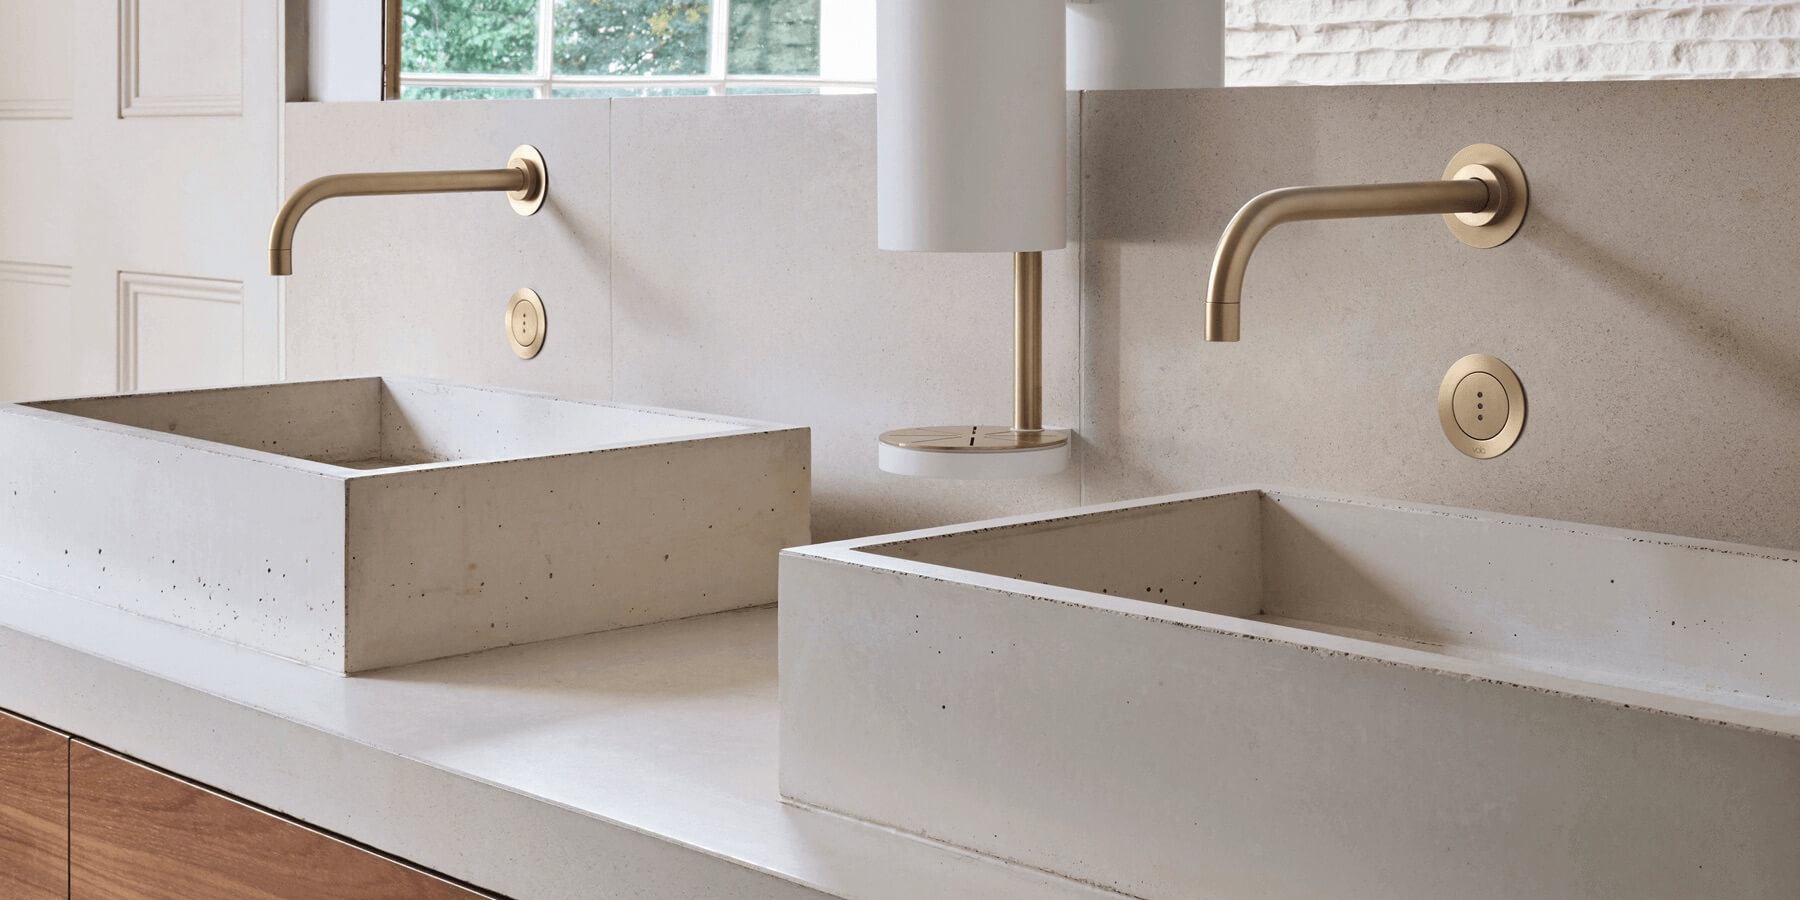 Double gold VOLA hands-free wall-mount faucets